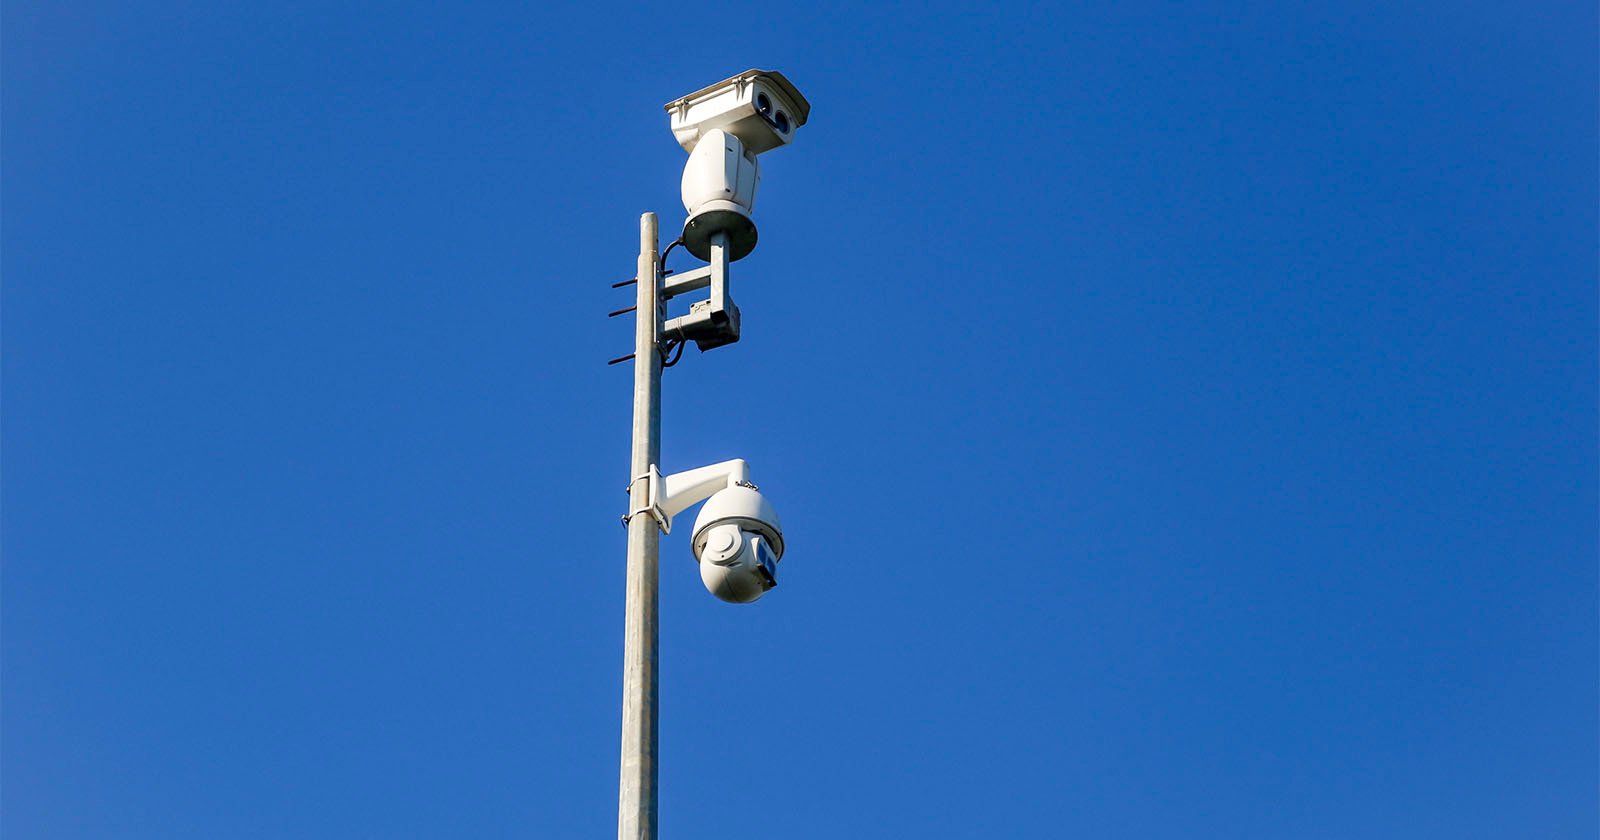 Council Installs Camera That Starts Broadcasting Live Images of Children